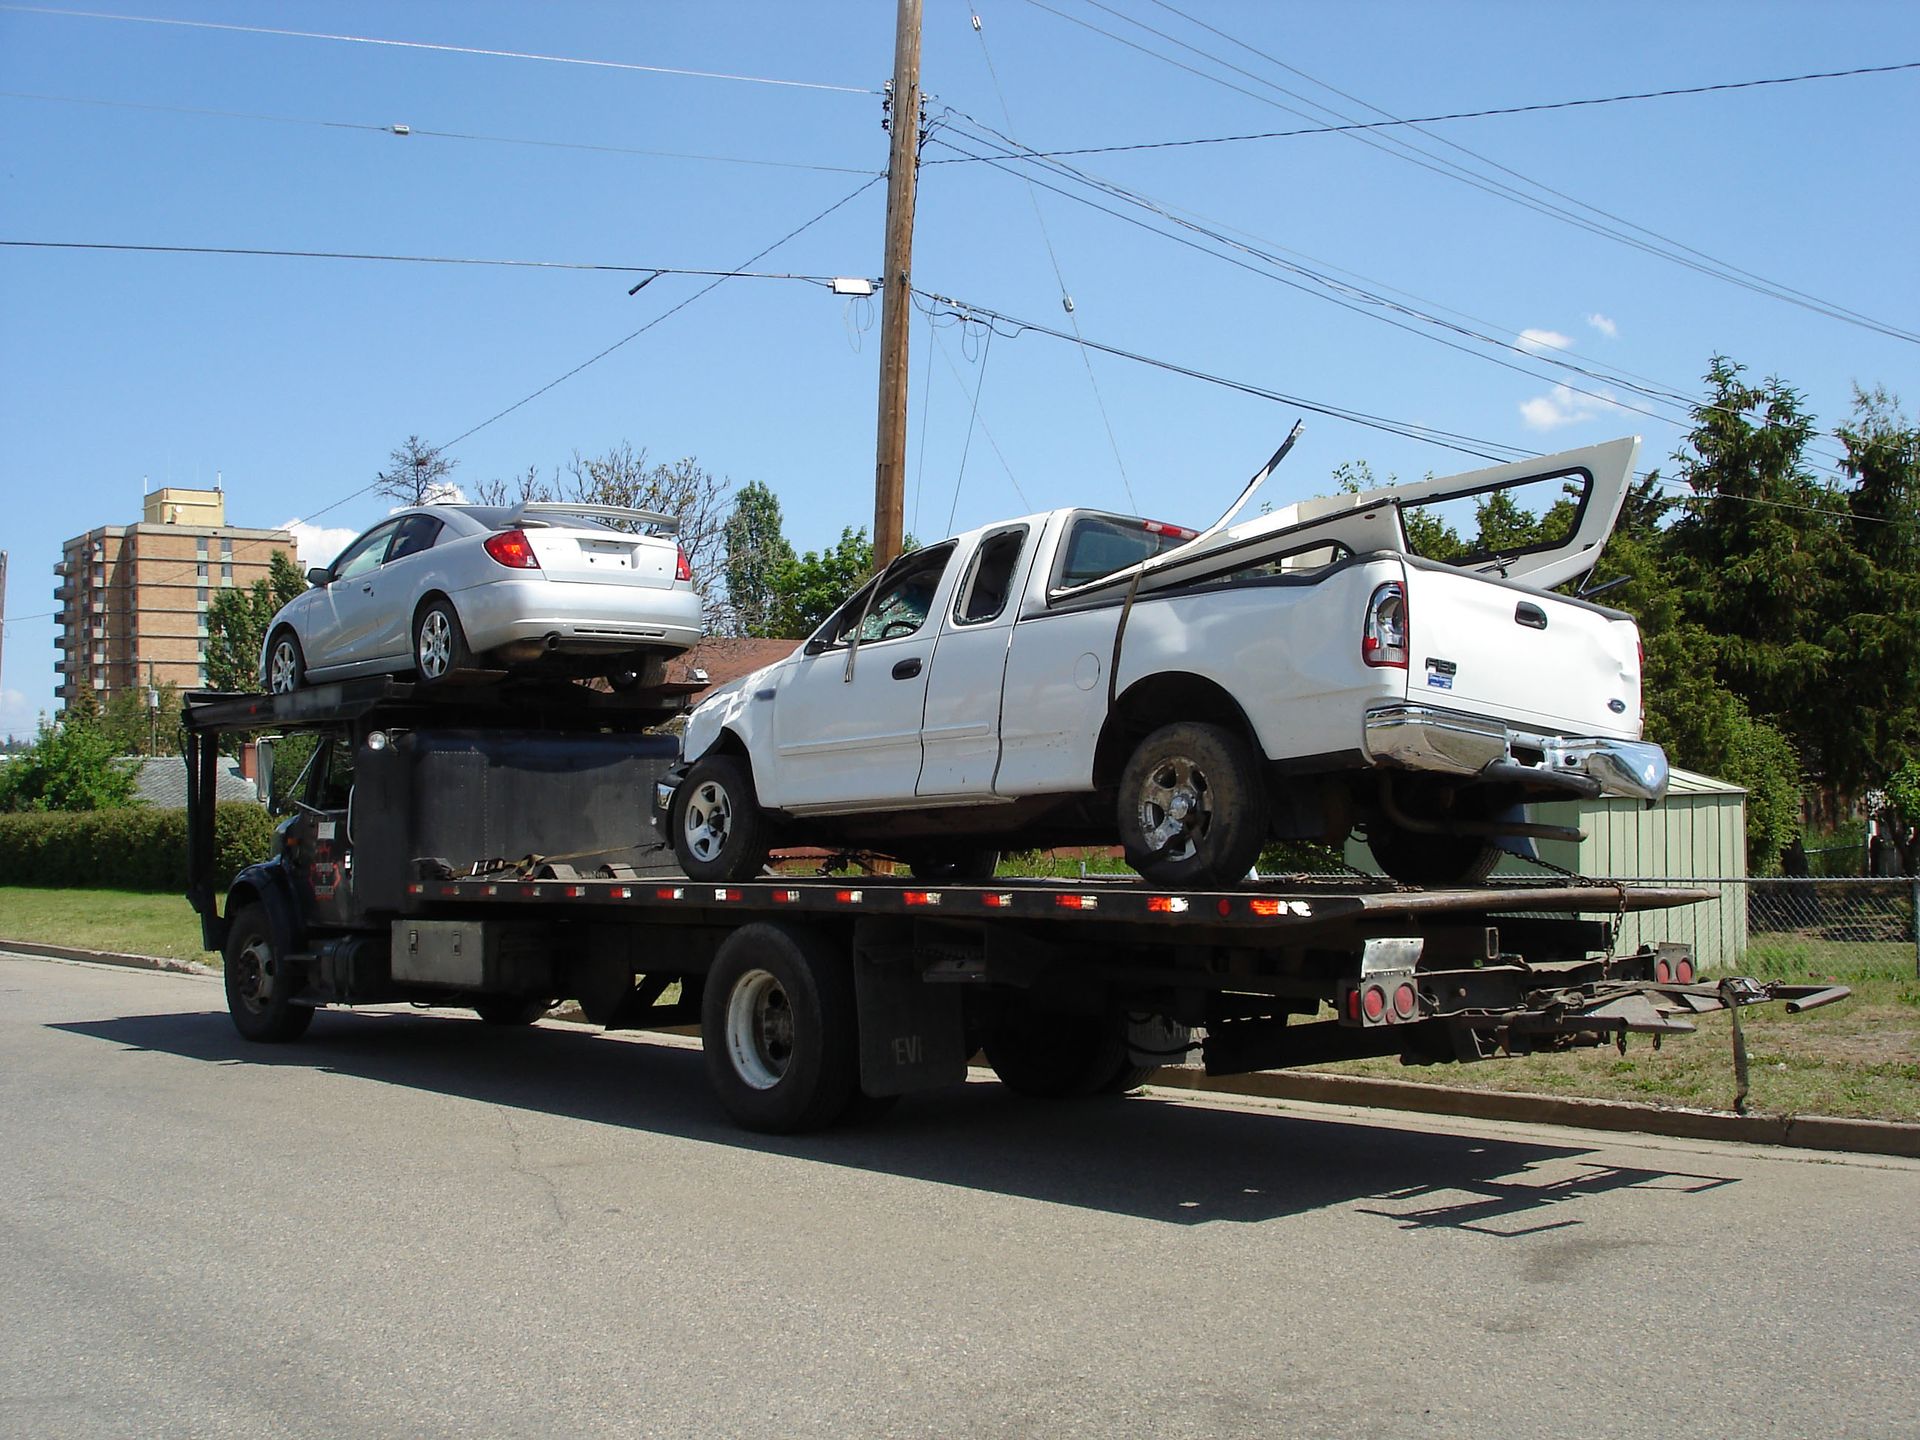 24 hour tow truck